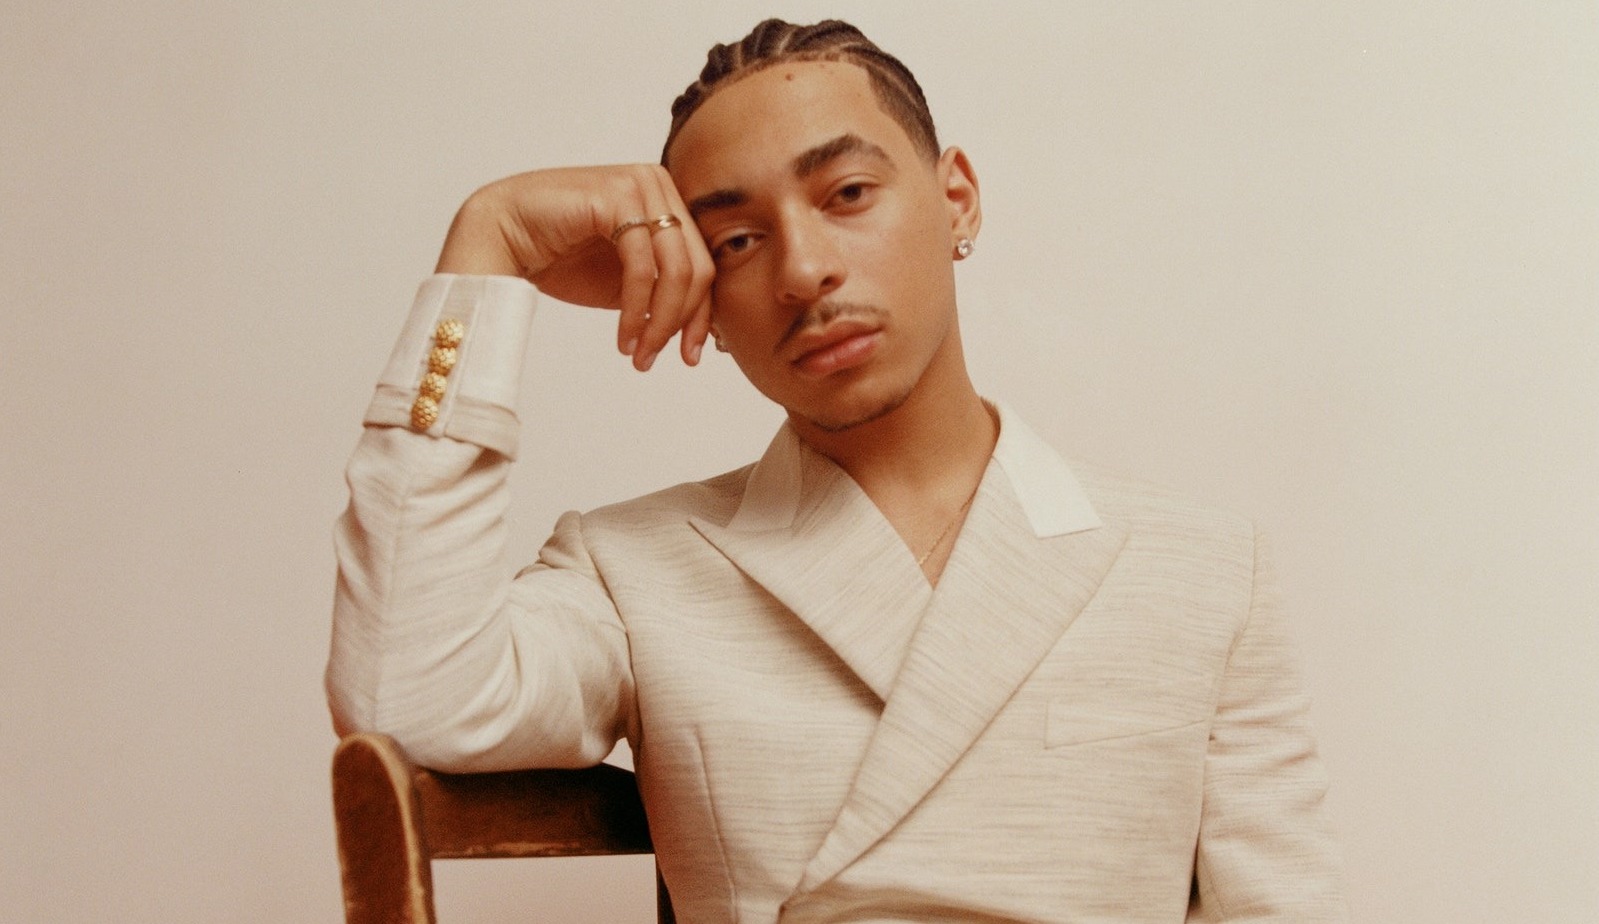 Julez Smith, Solange’s Son, Stuns for Vogue / Opens Up About Launching Modeling Career